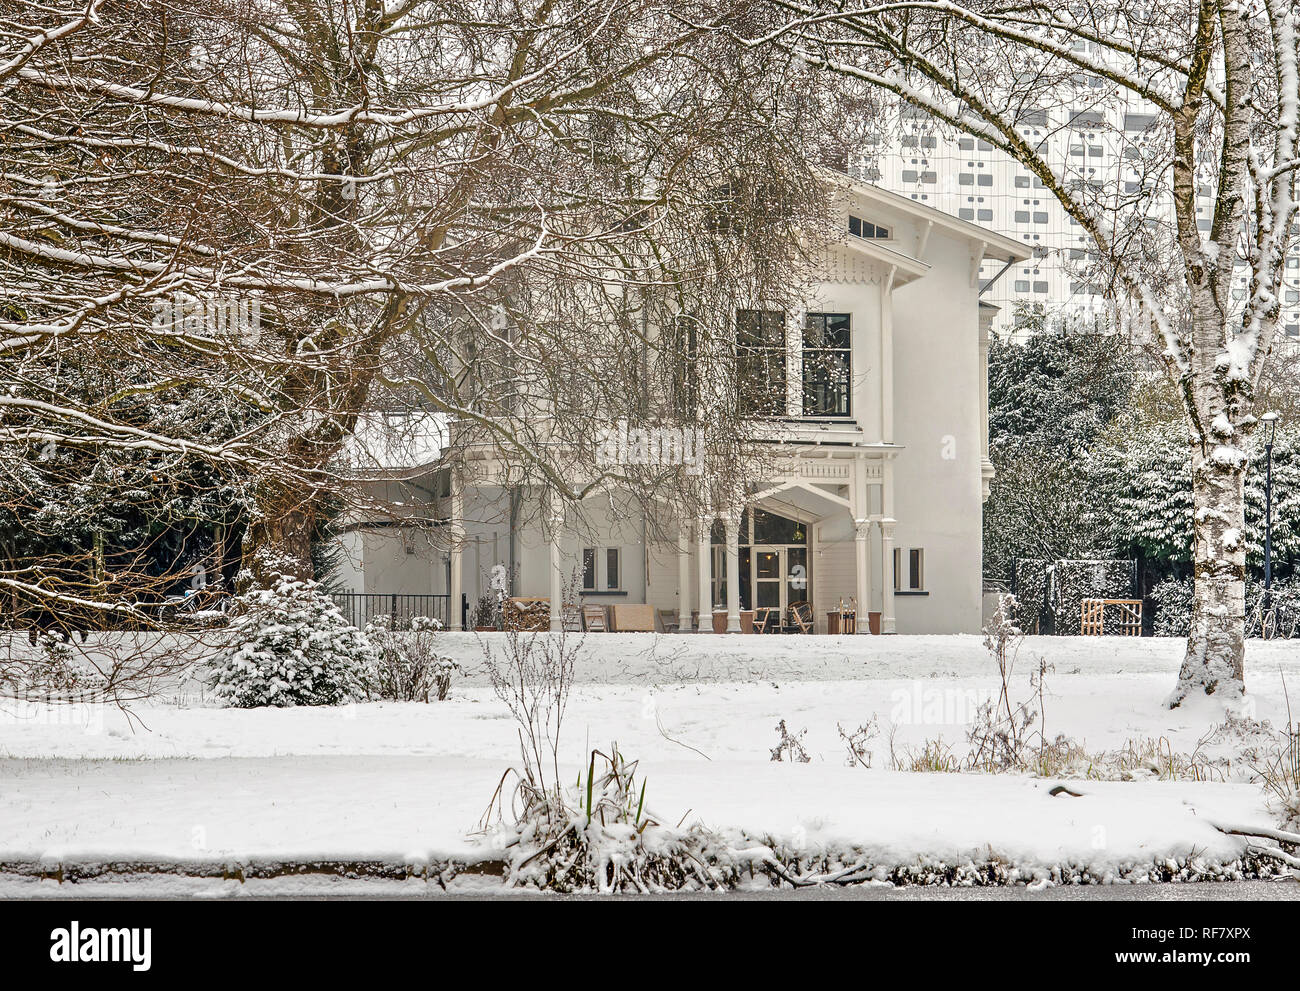 Rotterdam, January 22, 2019: wintry scene in The Park with the former coach chouse, now a cafe, and in the background the white facade of the Erasmus  Stock Photo